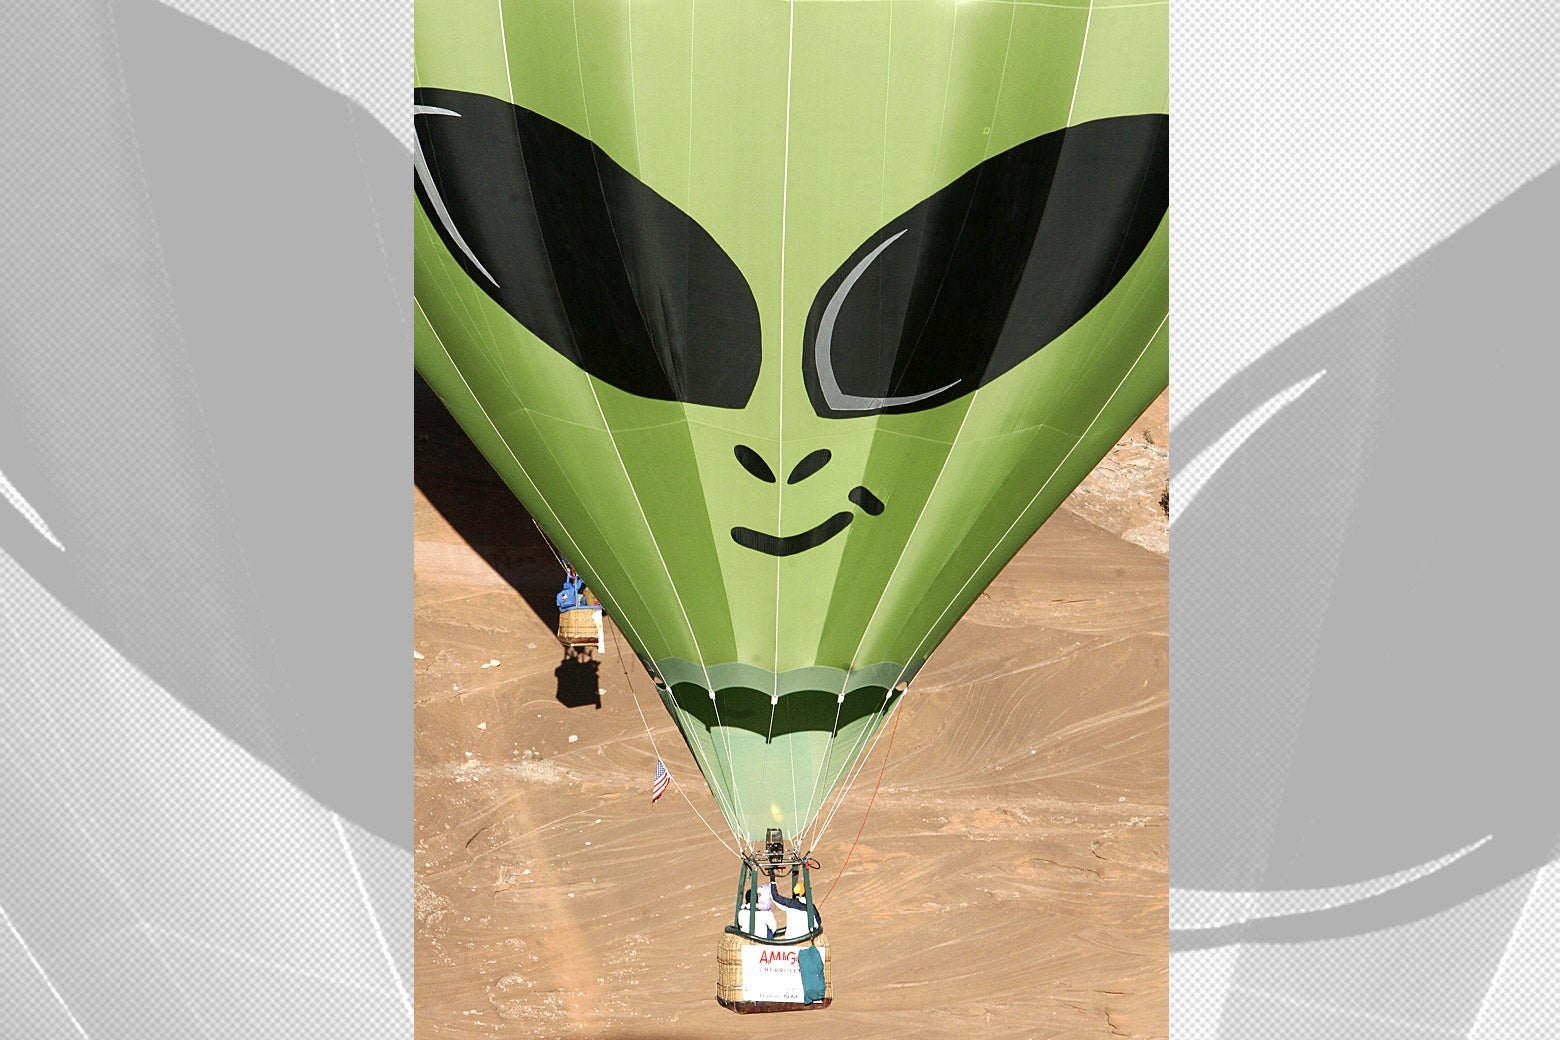 A green hot air ballon with the face of an alien on it.